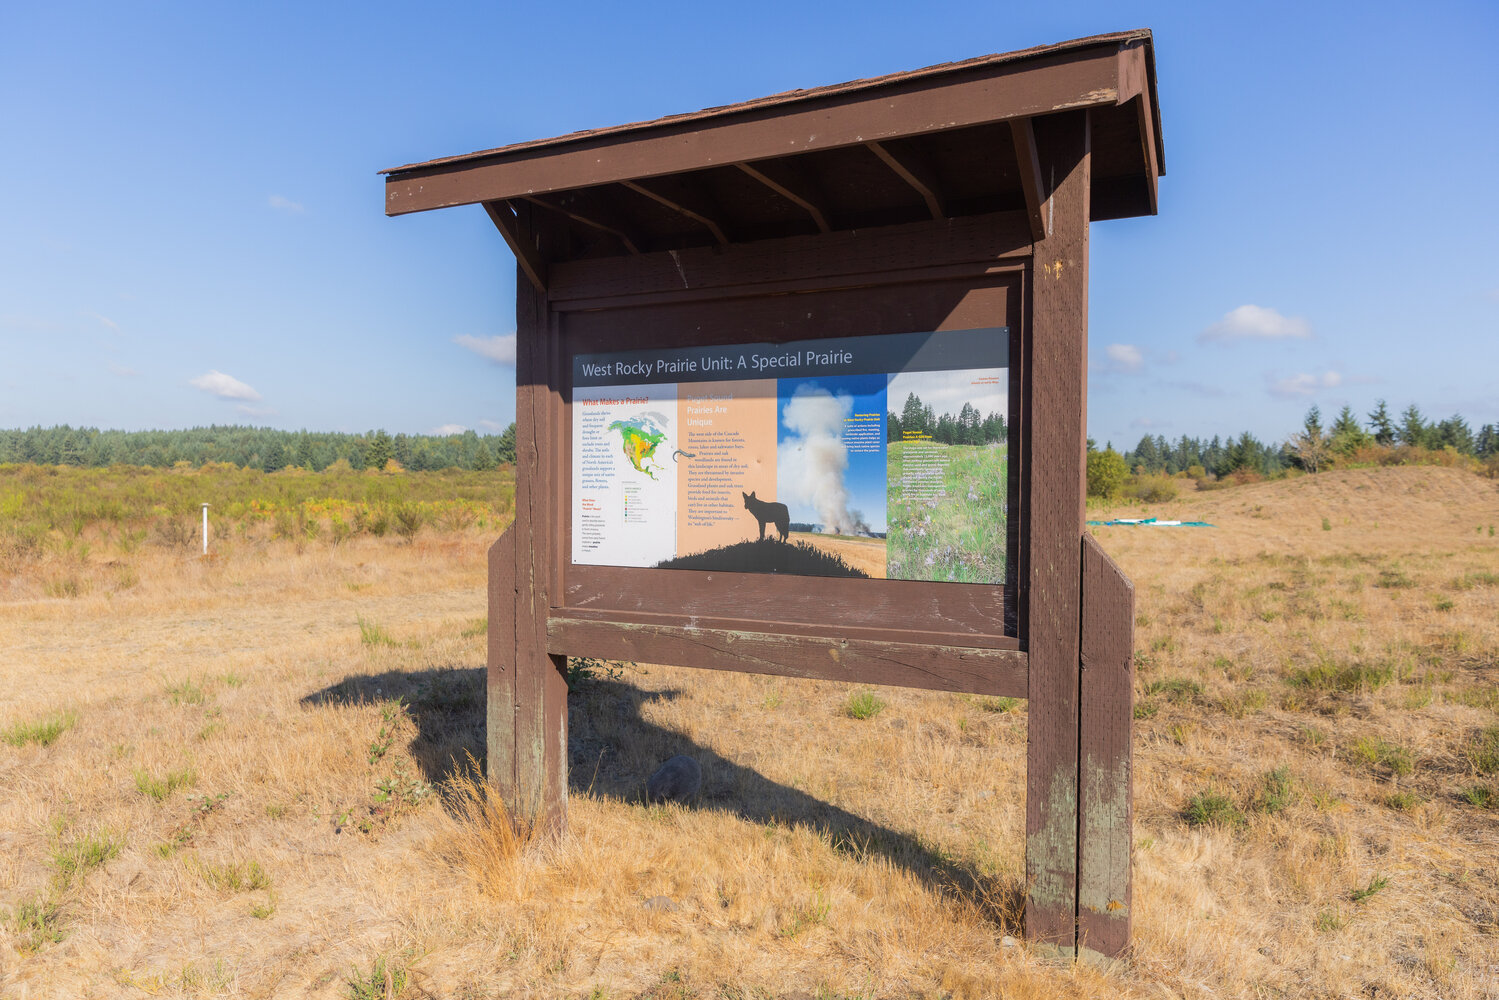 A sign displays information about wildlife and vegetation at West Rocky Prairie near Tenino on Thursday, Sept. 21.